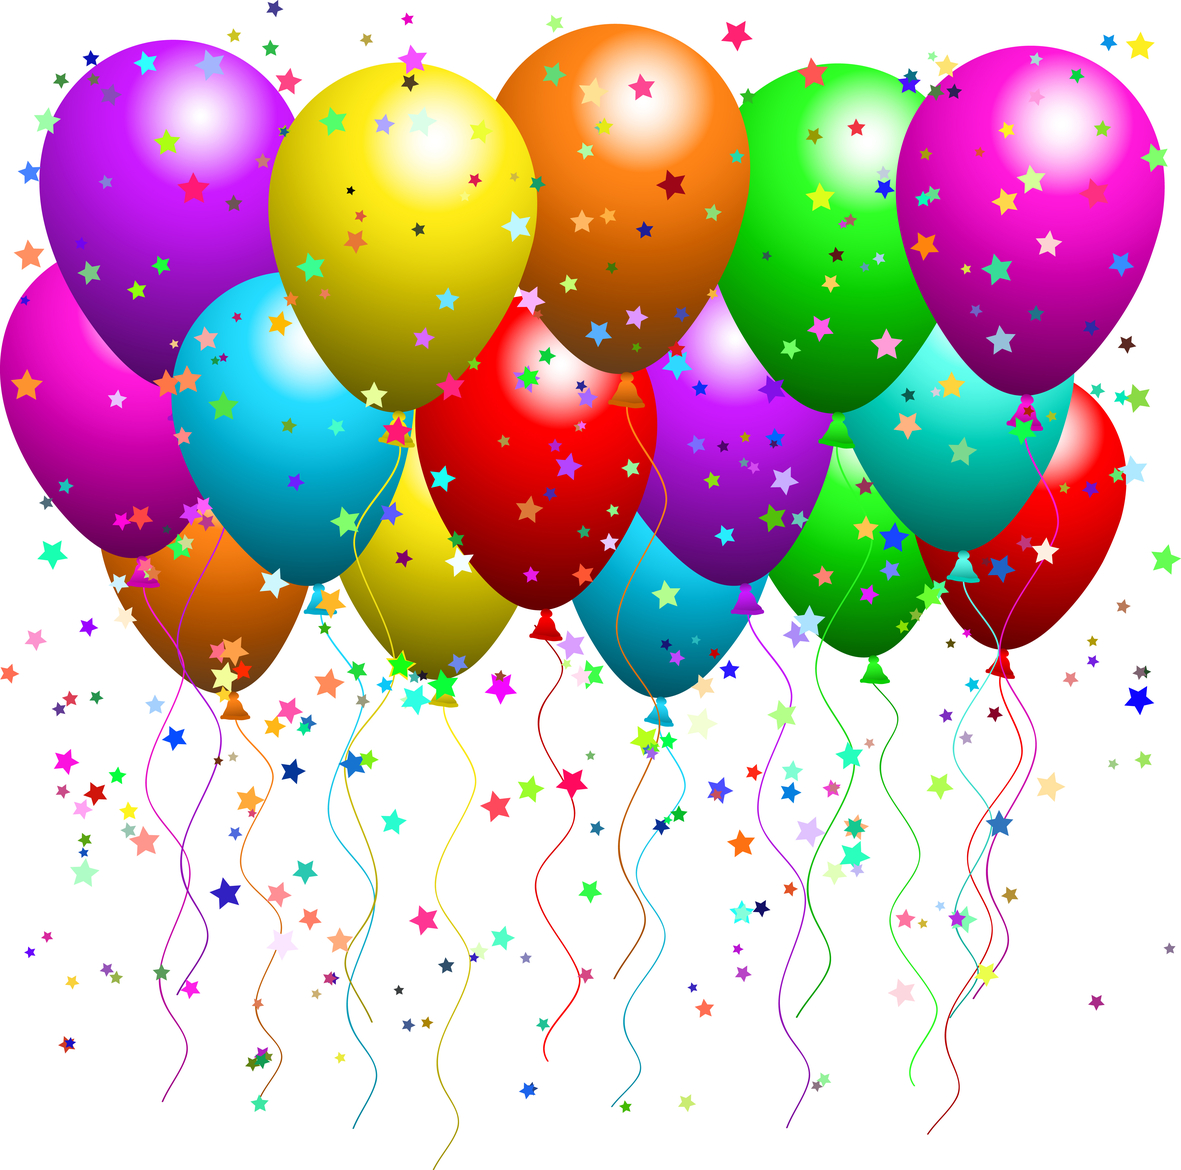 balloons and confetti clipart - photo #38